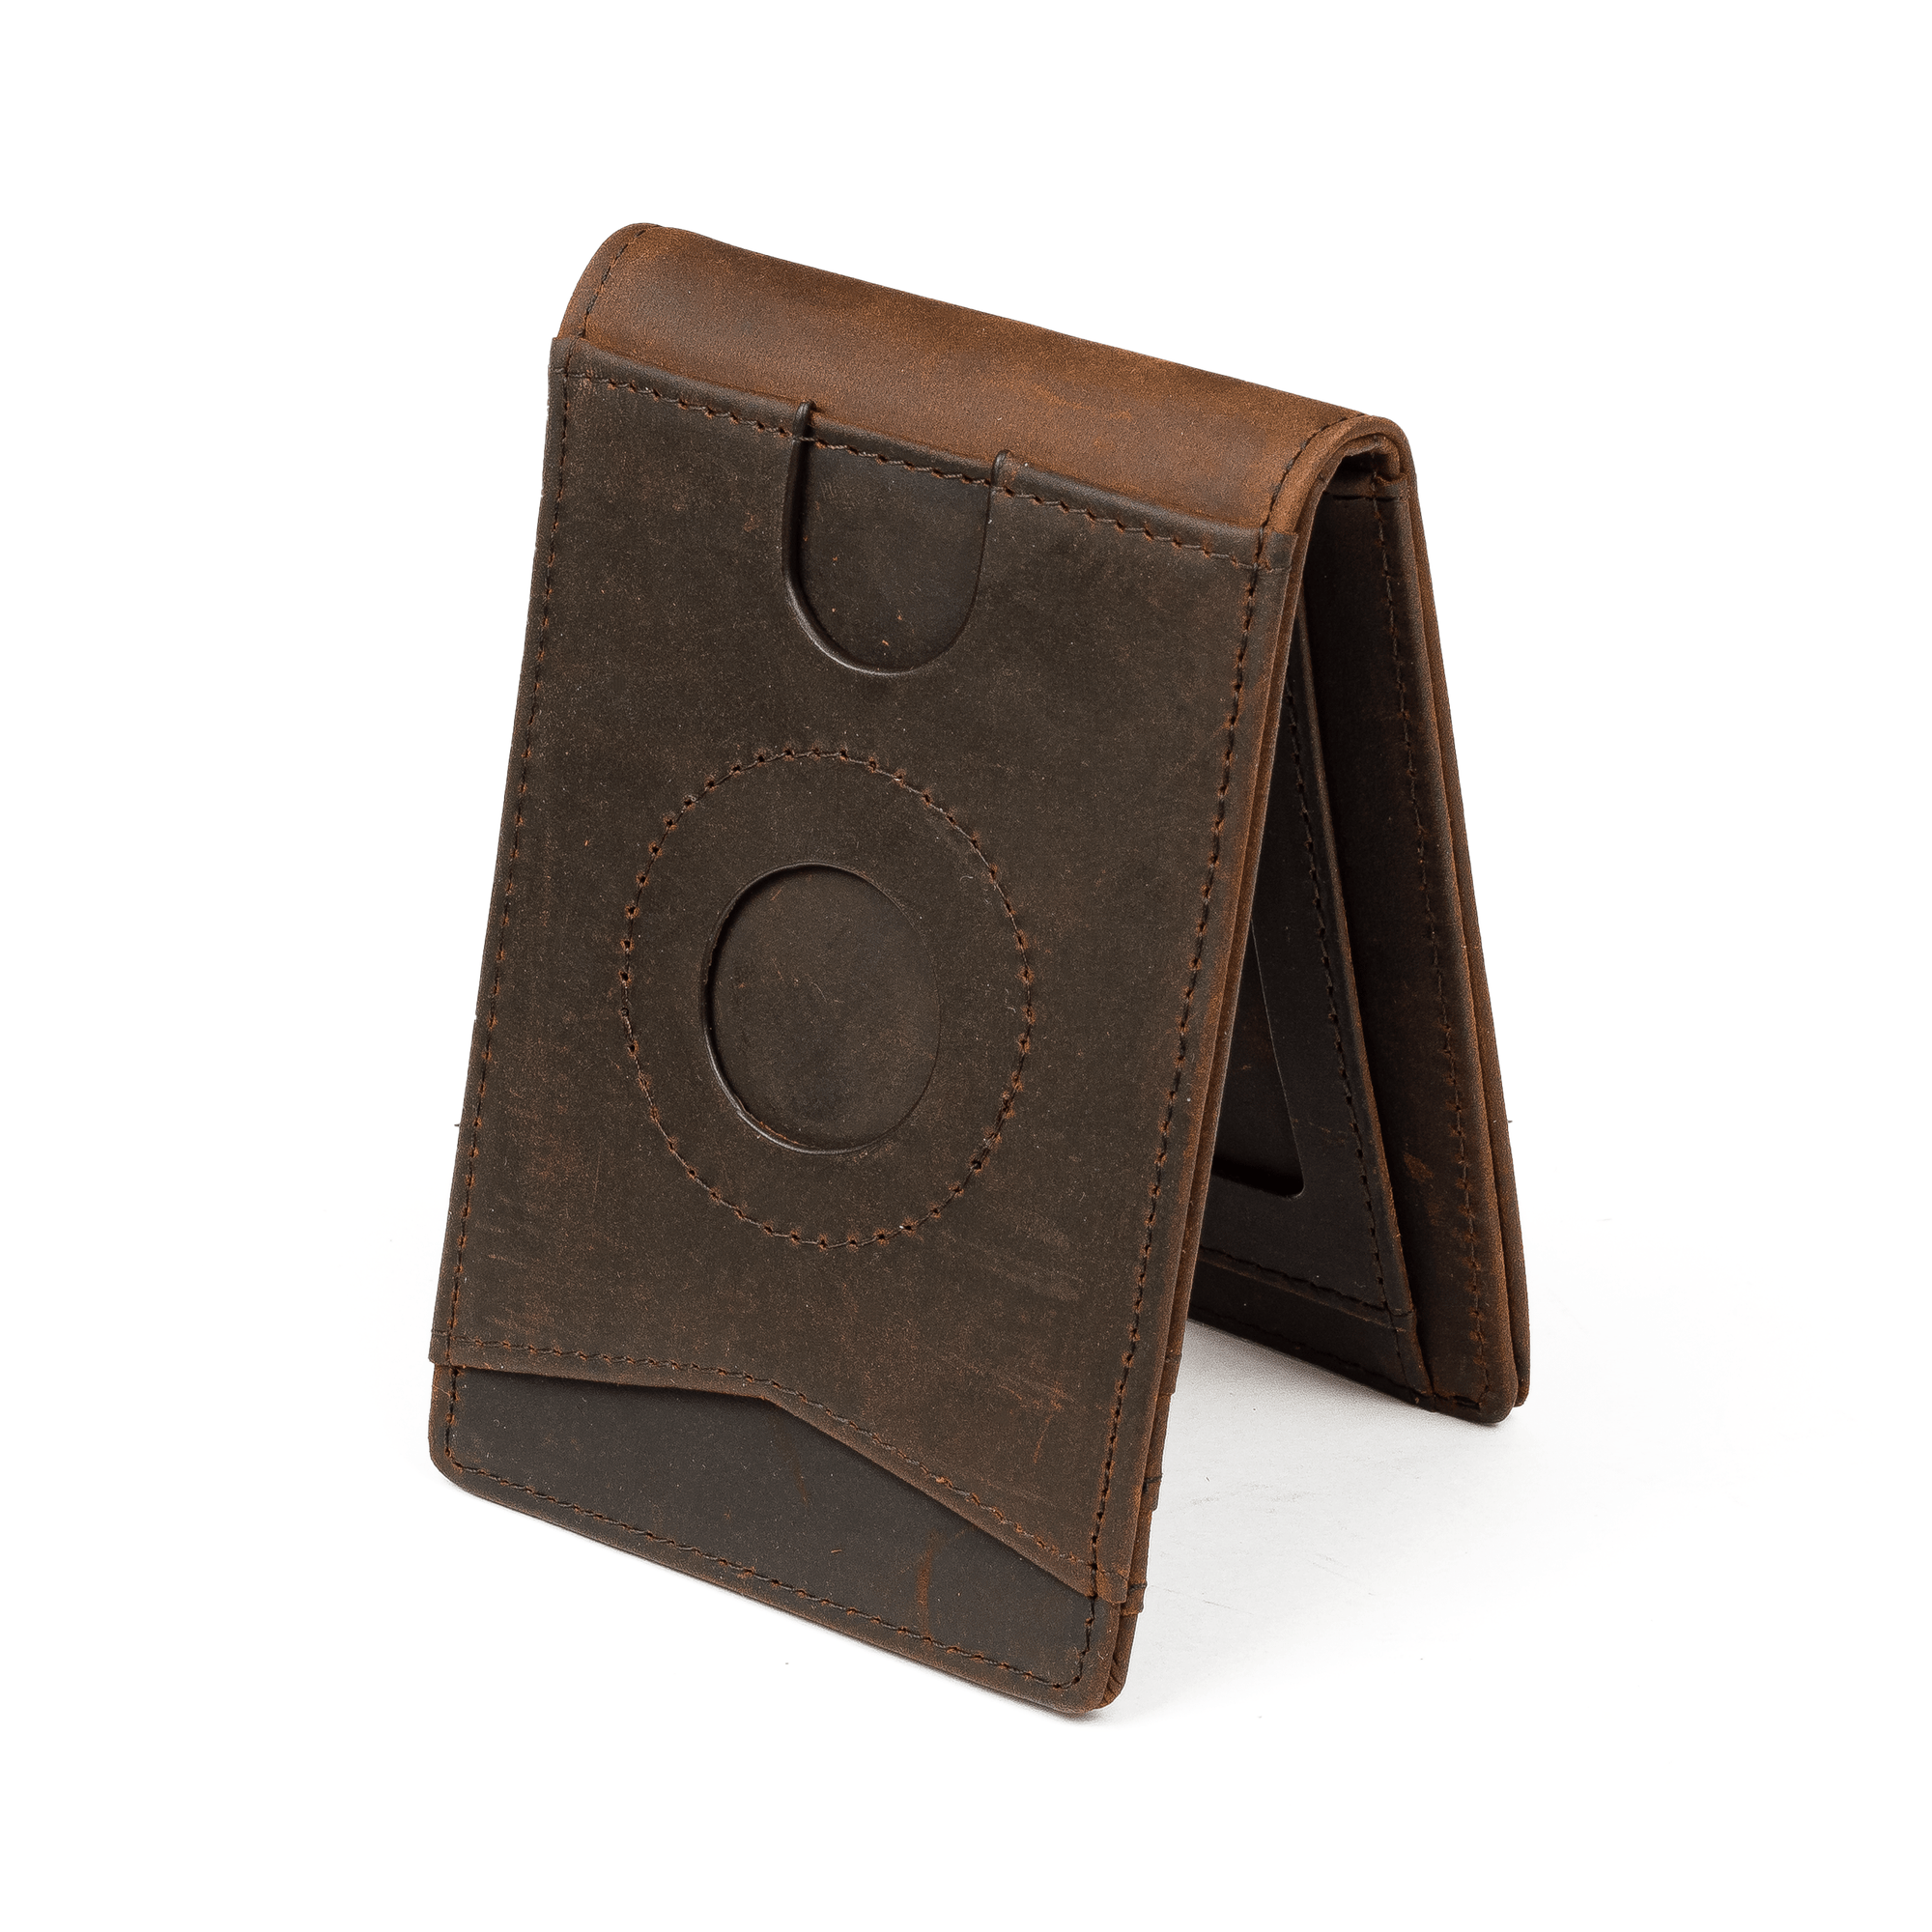 The Bifold Monetial | AirTag Premium Leather Wallet | RFID Blocking | Slim Leather Wallet